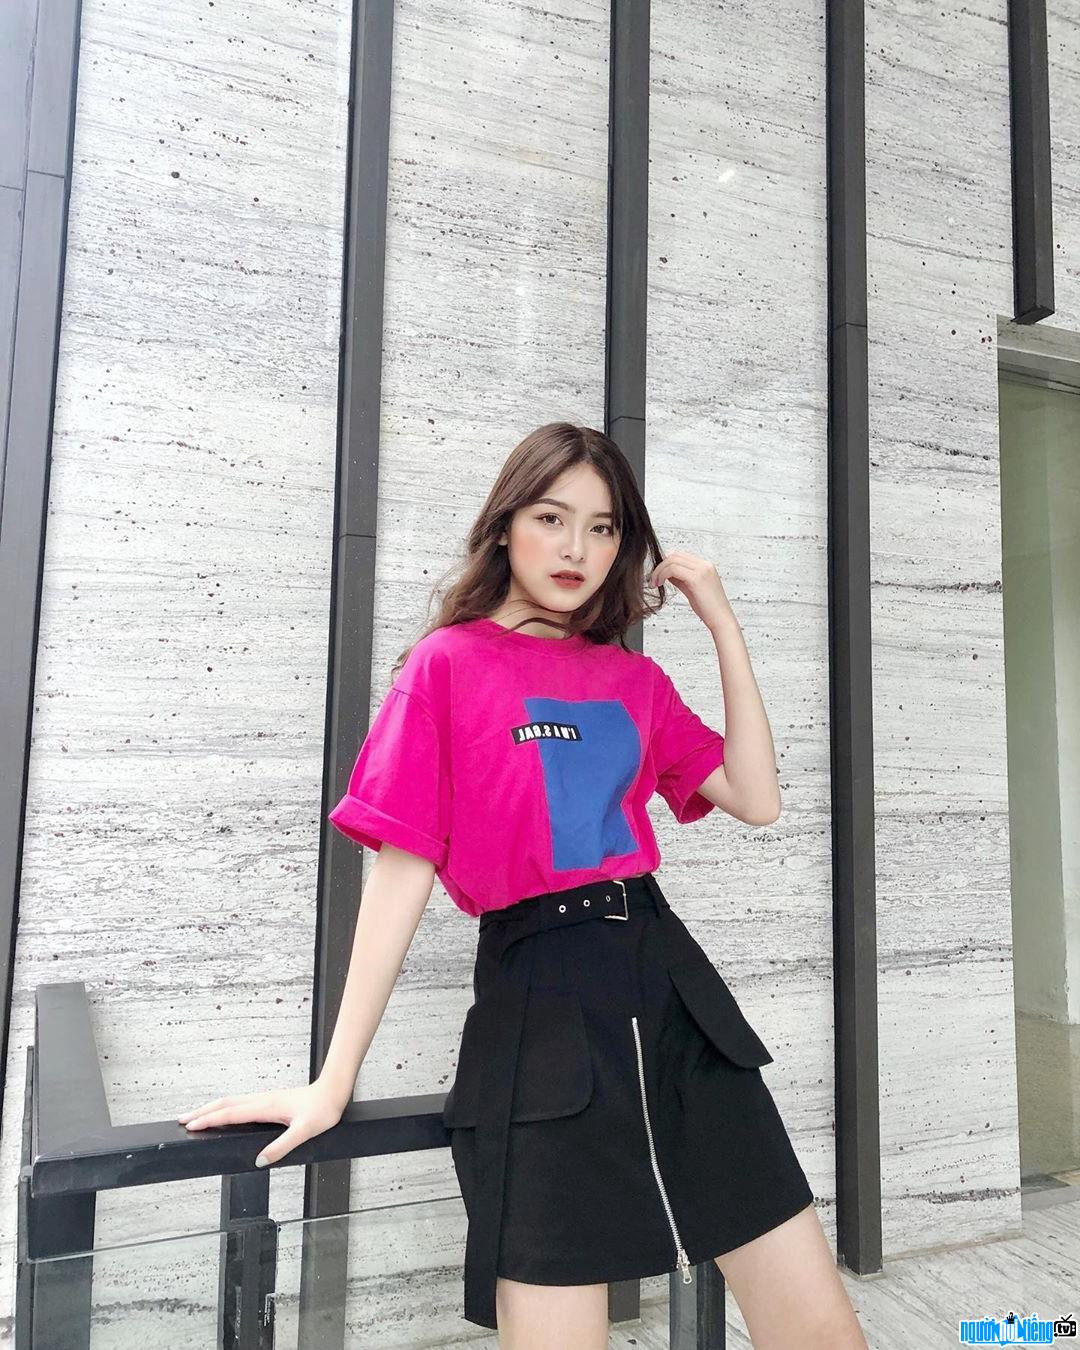  beautiful Thu Hien with black-pink style